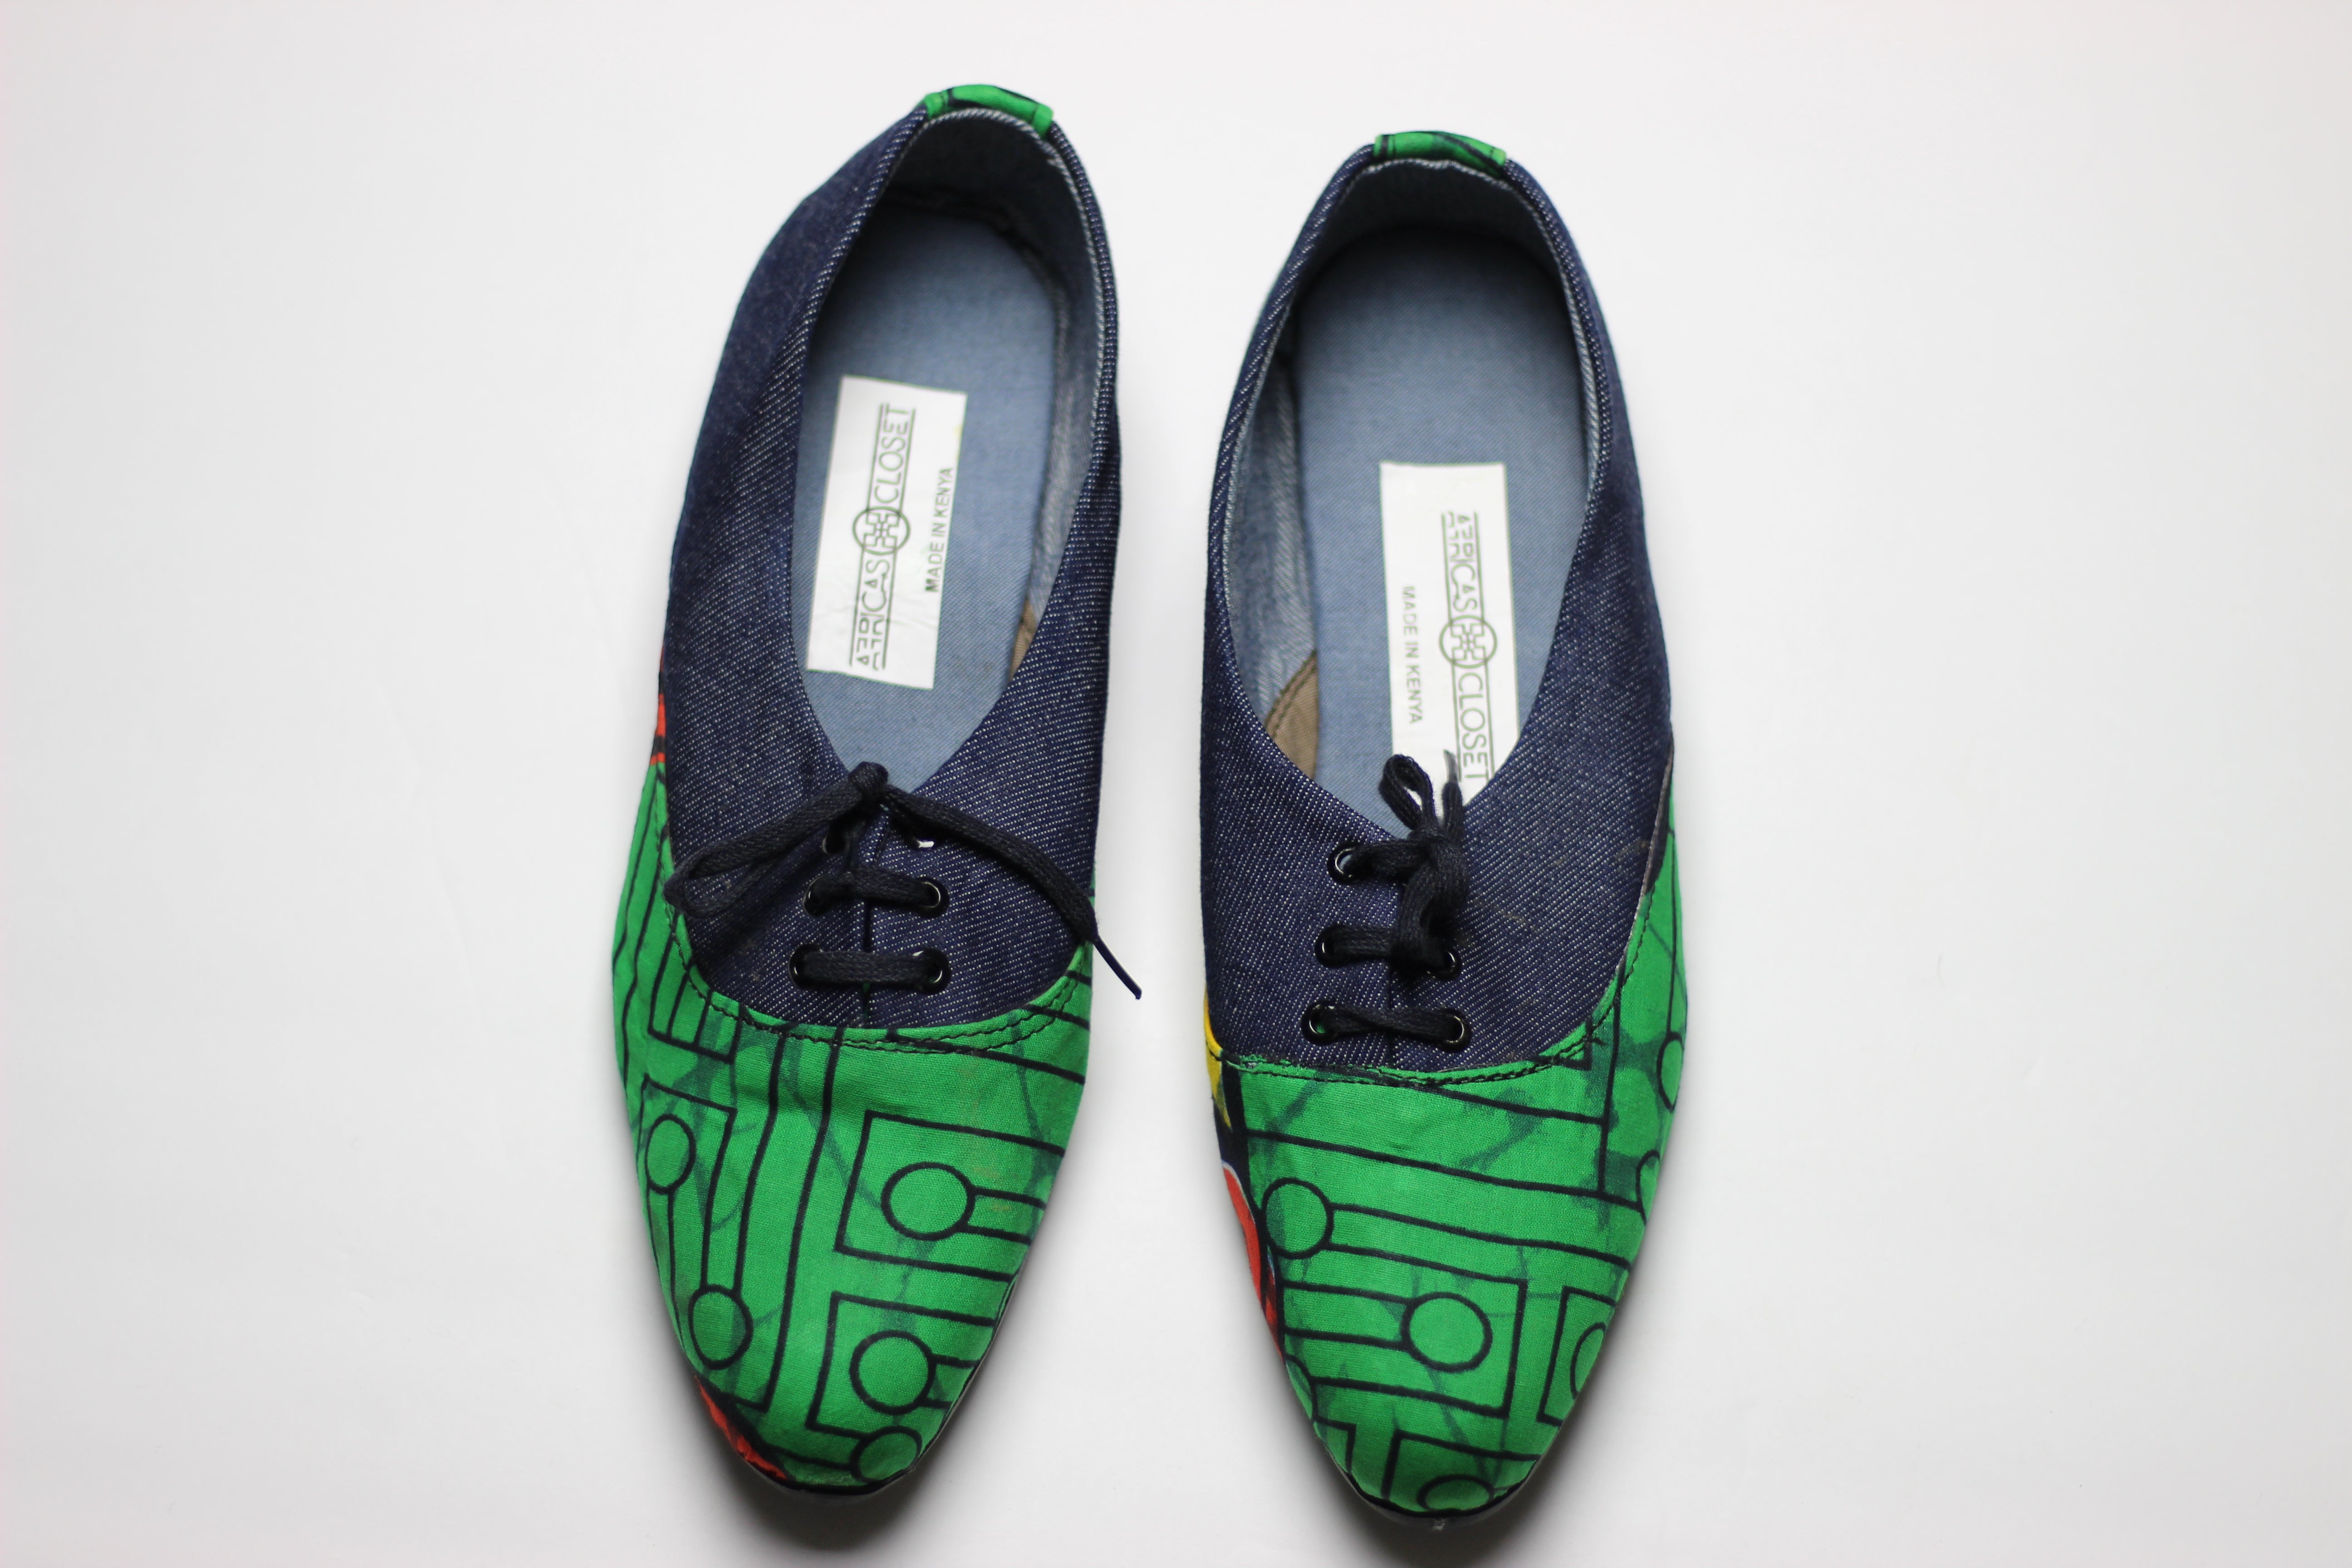 African Print /Ankara Flat Shoes (with laces) Denim detail - Red and Green Animal Print. - Africas Closet